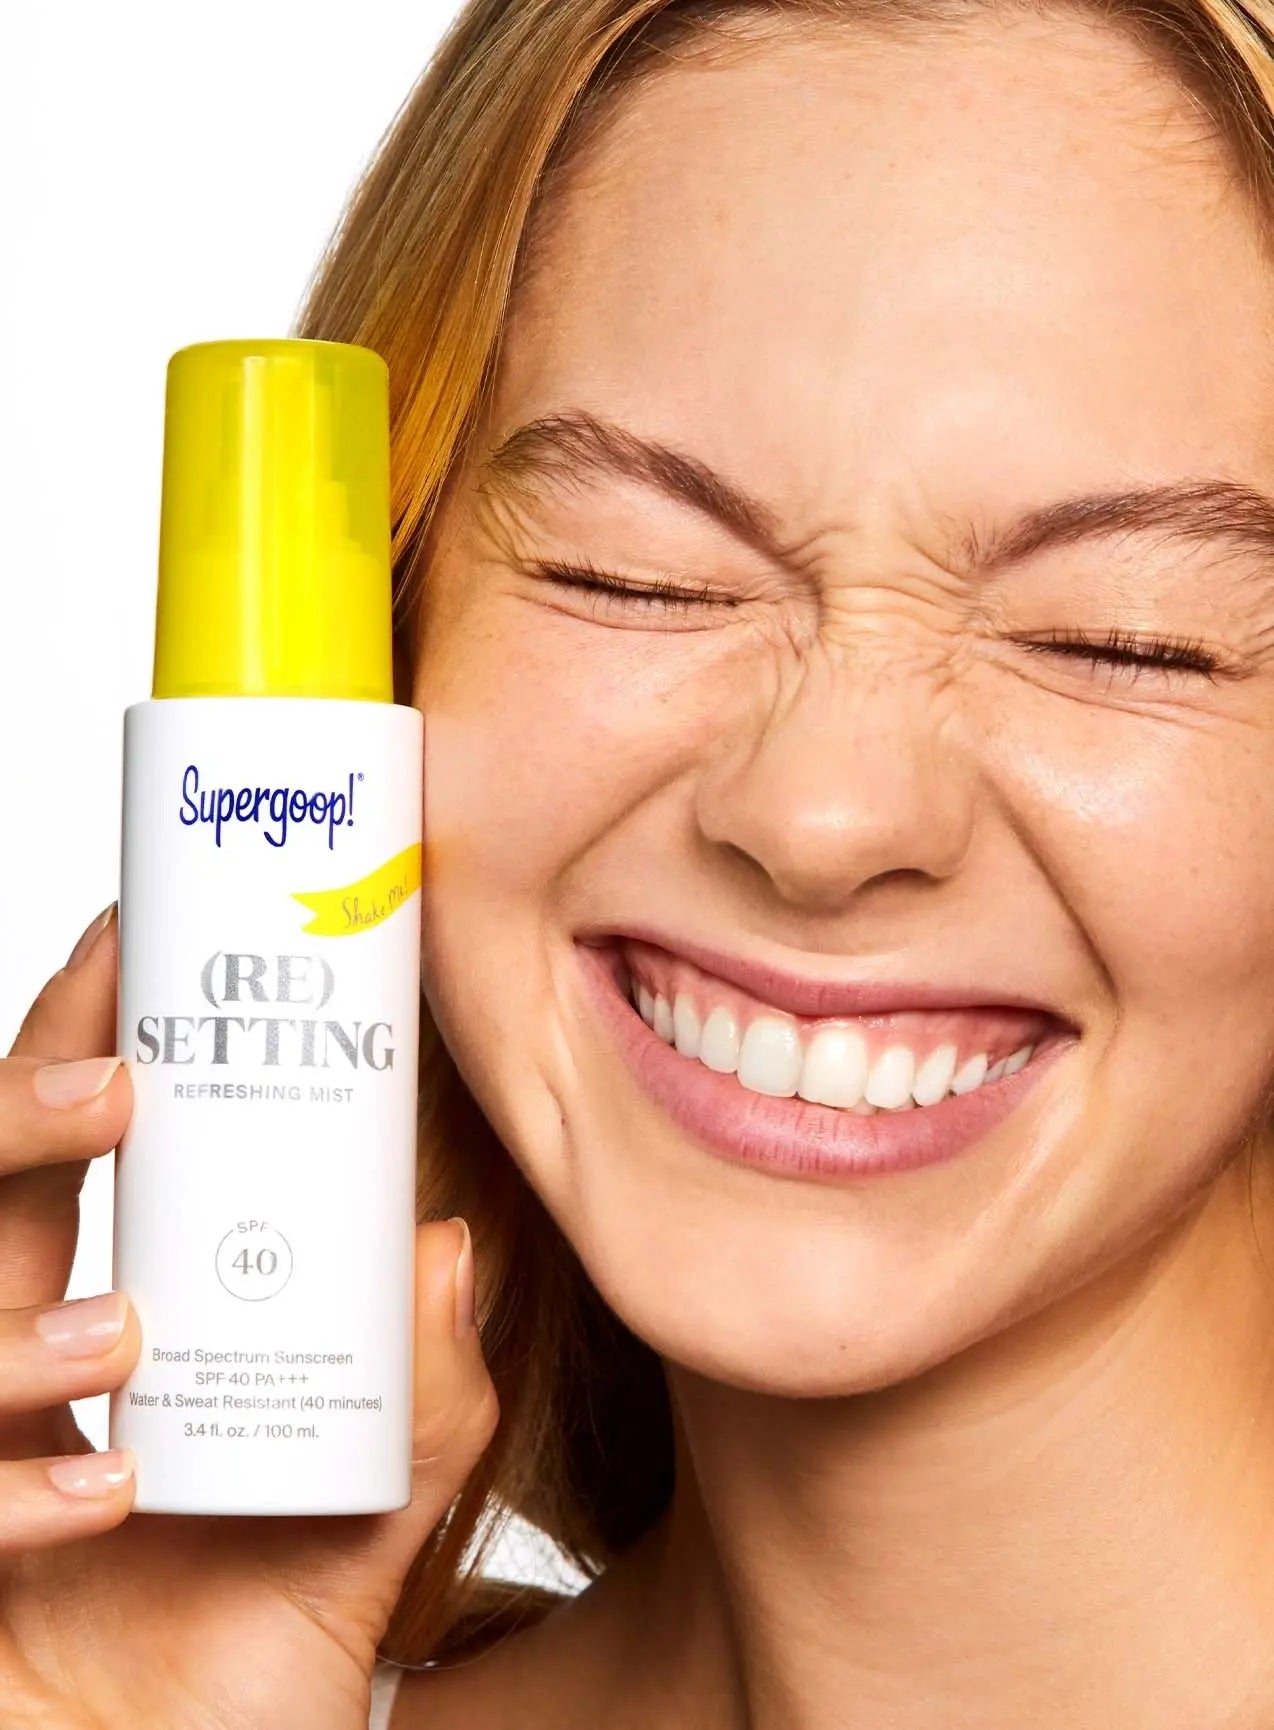 (Re)Setting Refreshing Mist SPF 40 being held by a woman squinting her eyes